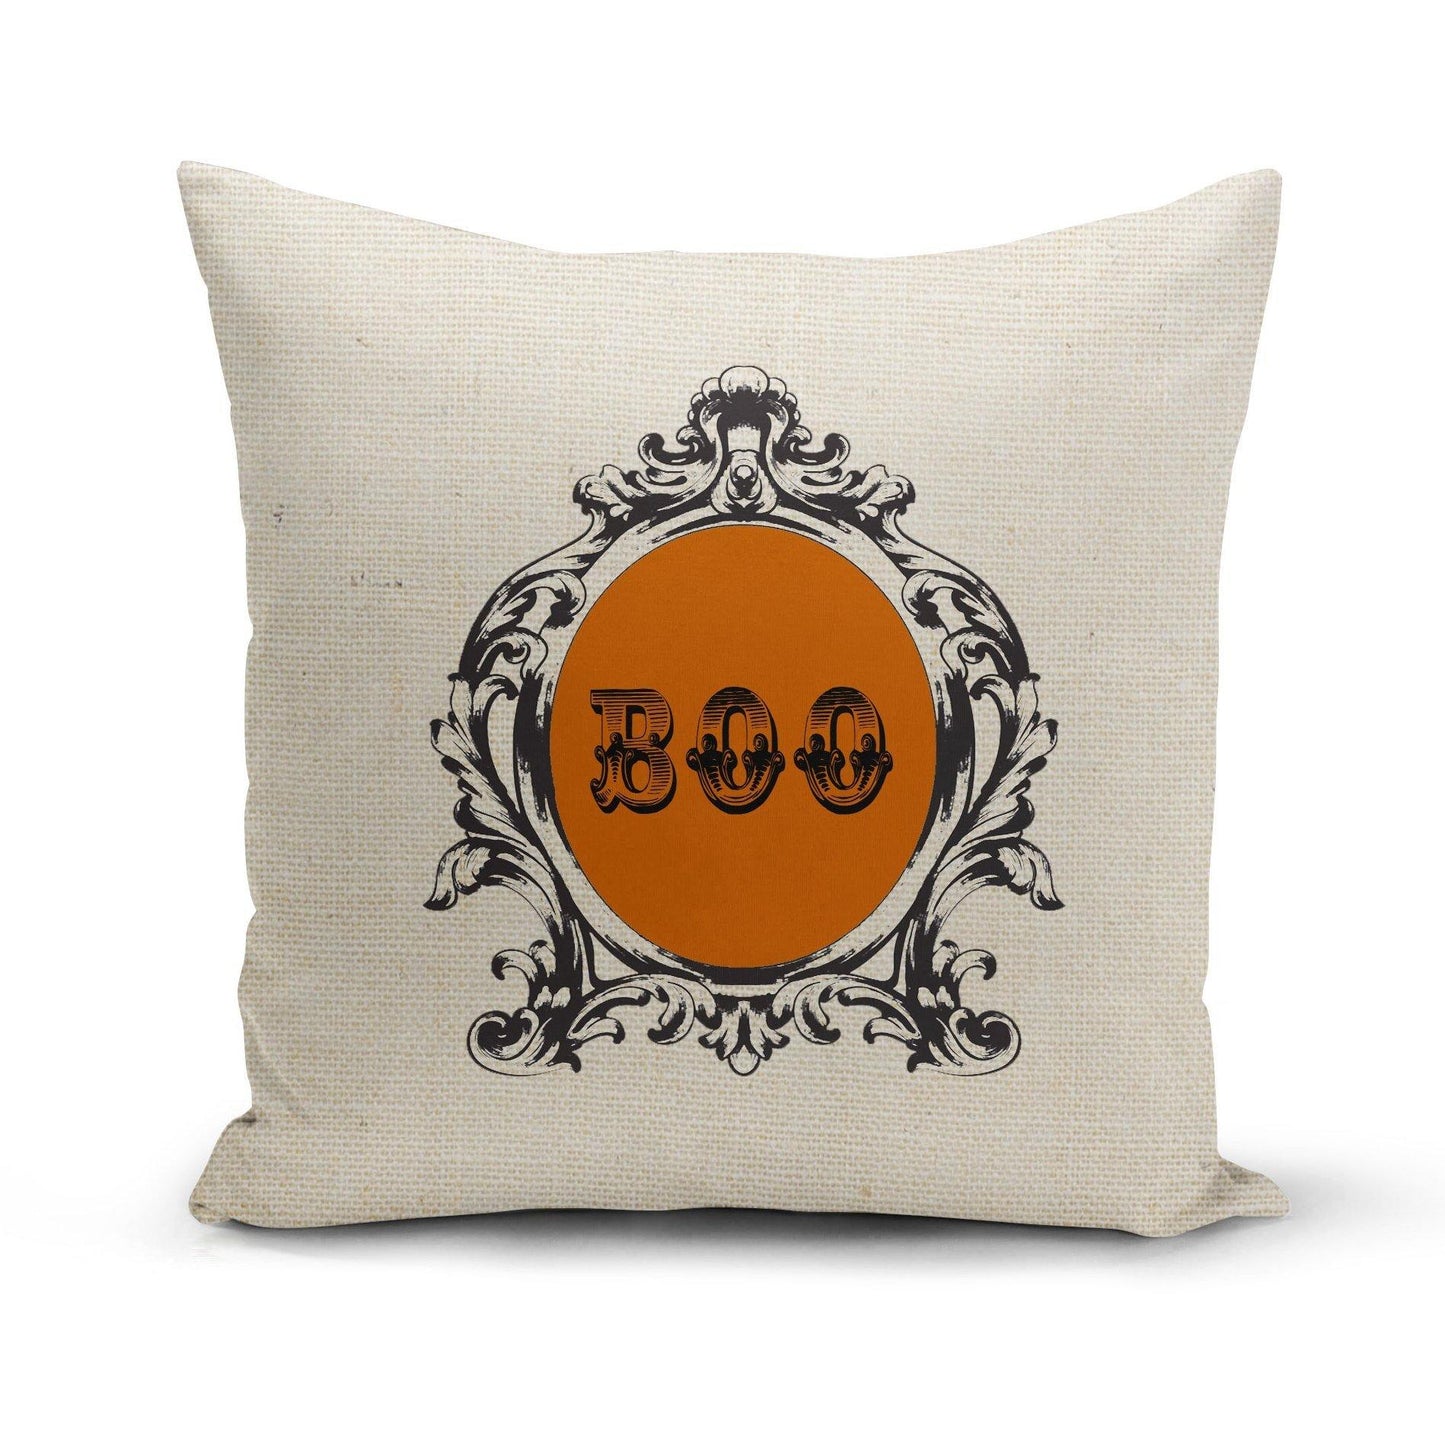 Boo-Fancy Pillow Cover